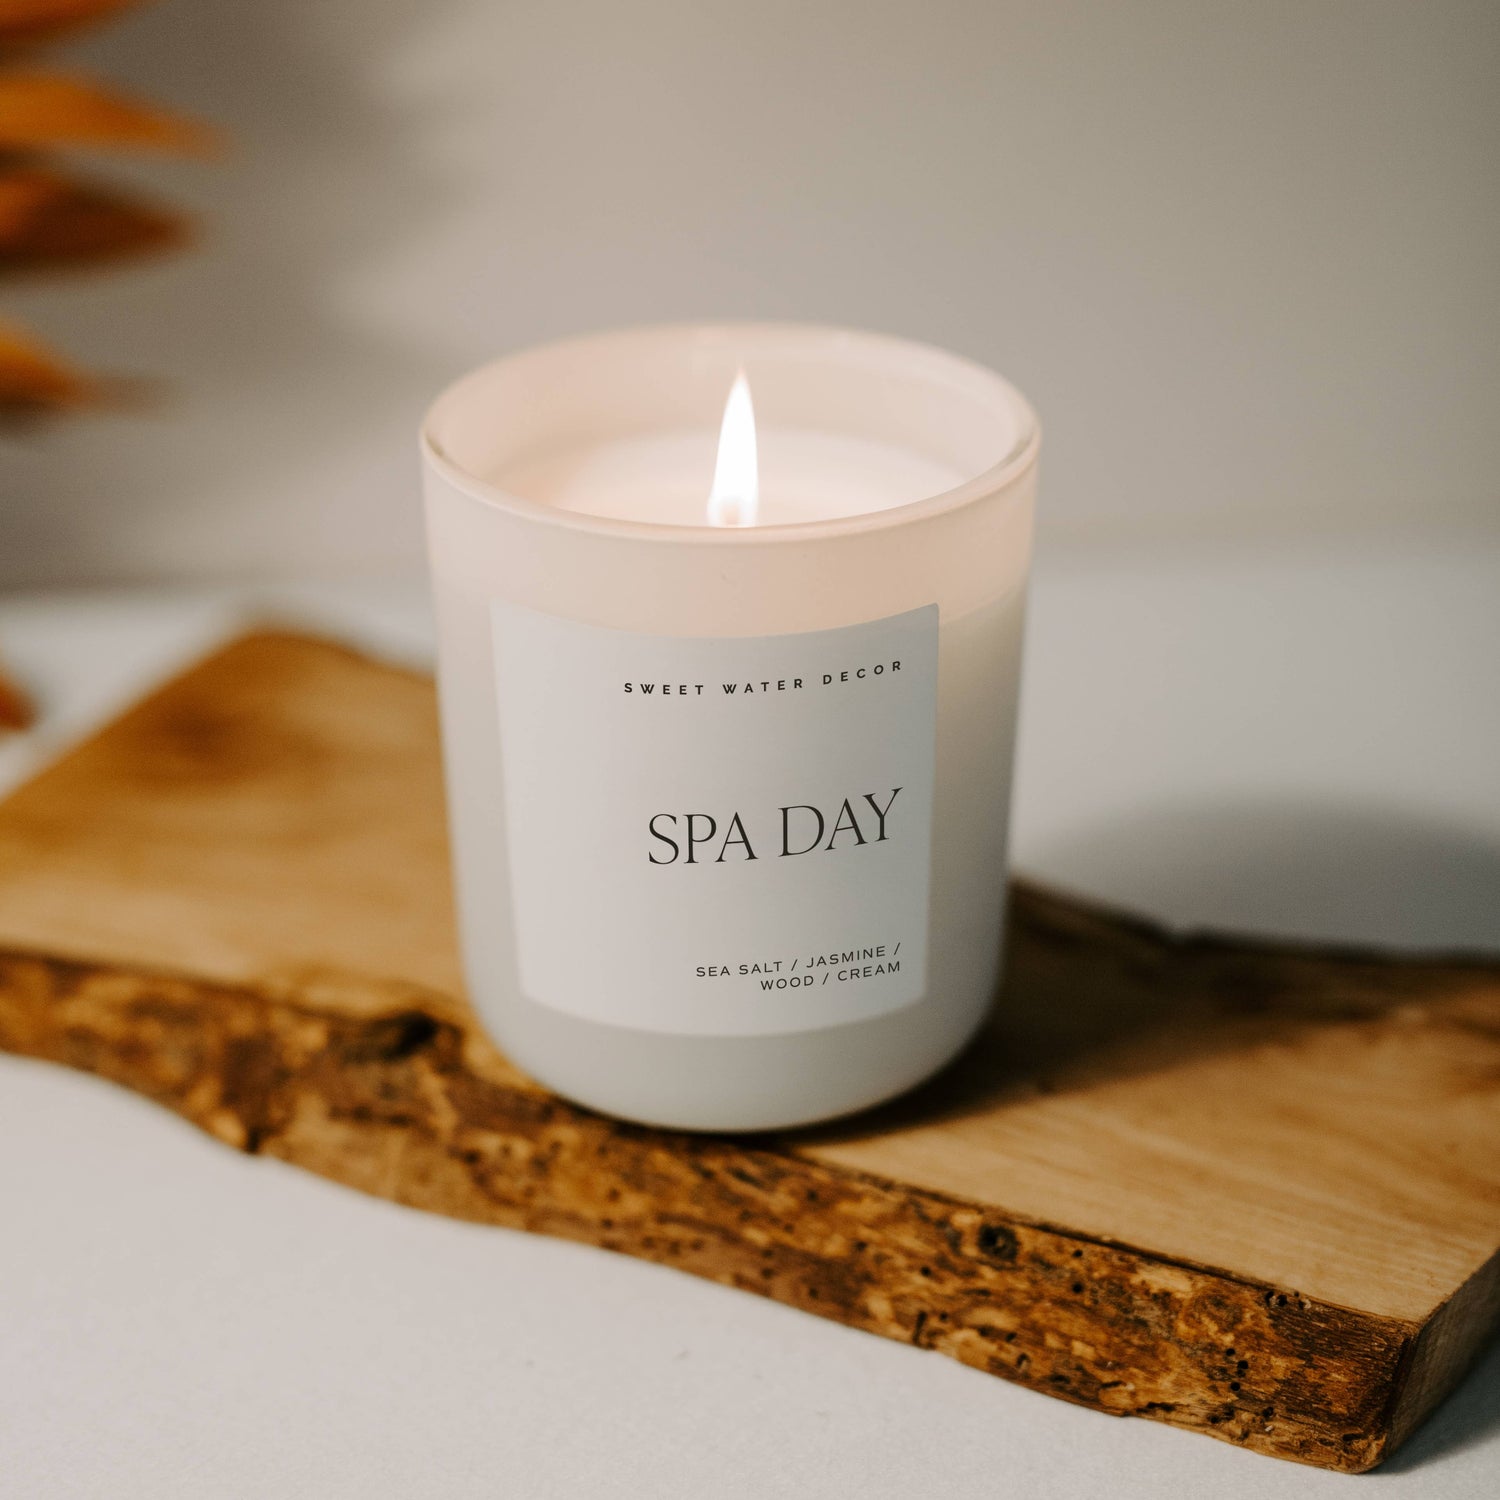 Spa Day 15 oz Soy Candle